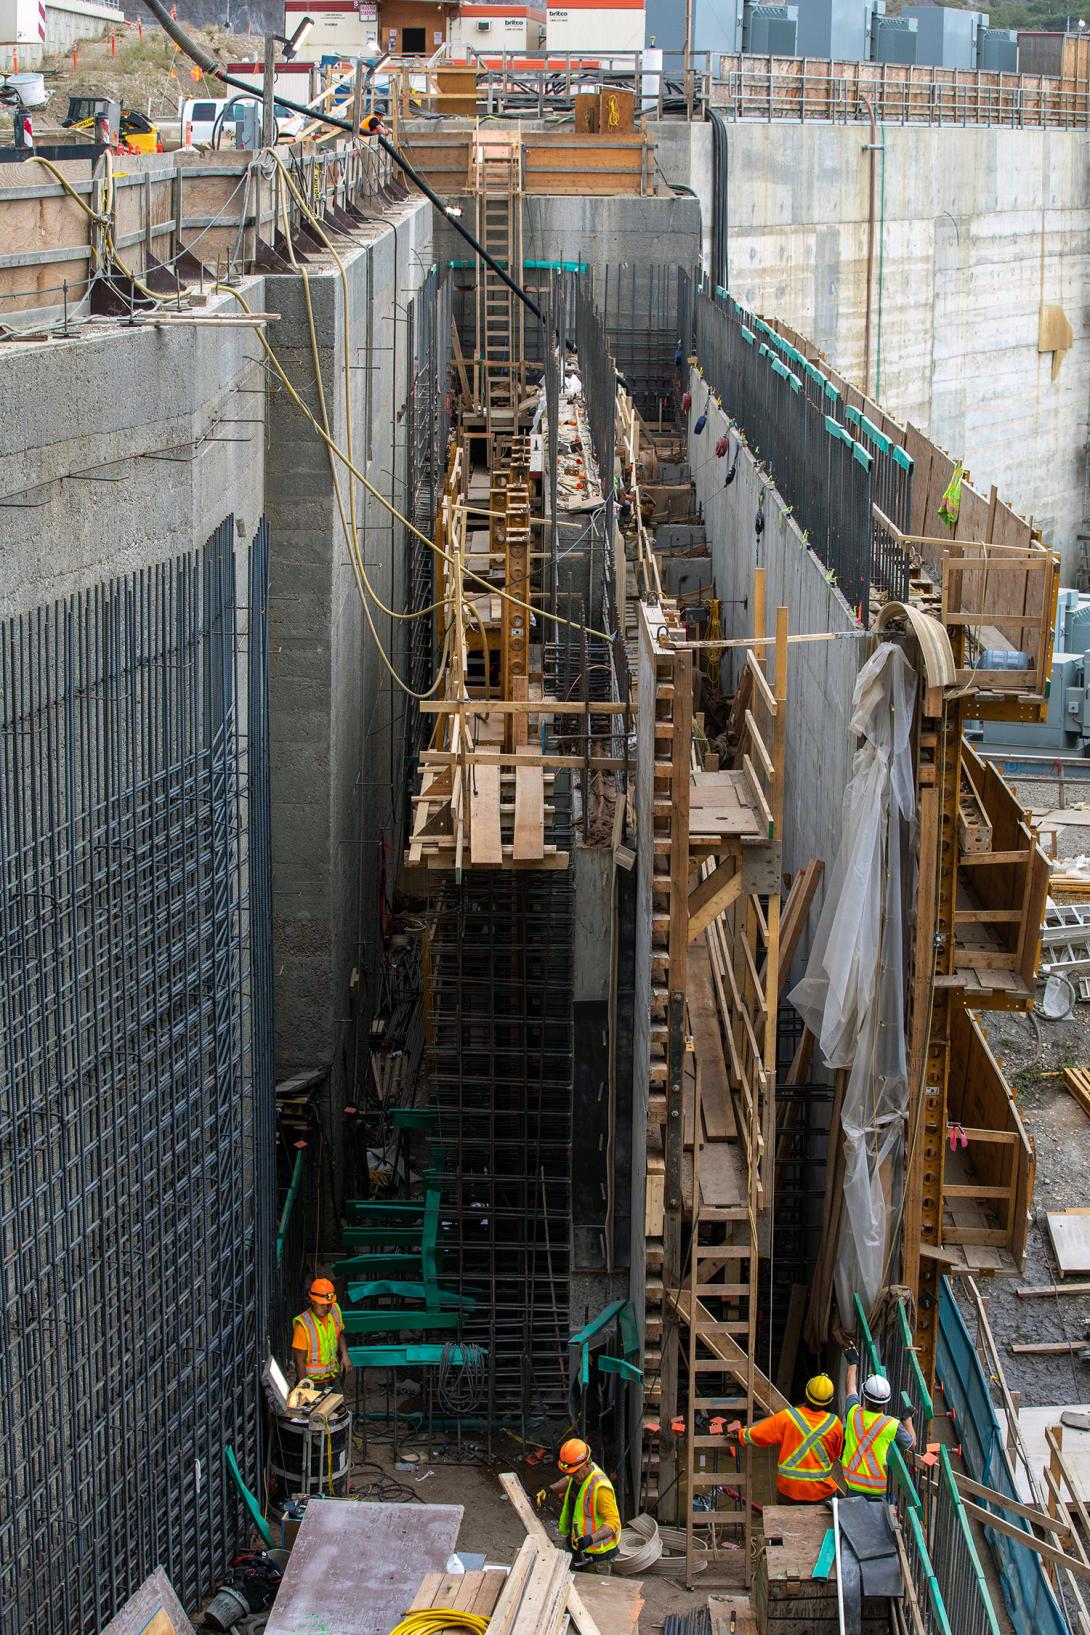 Preparing and installing formwork for the walls of the permanent upstream fish passage. | August 2022